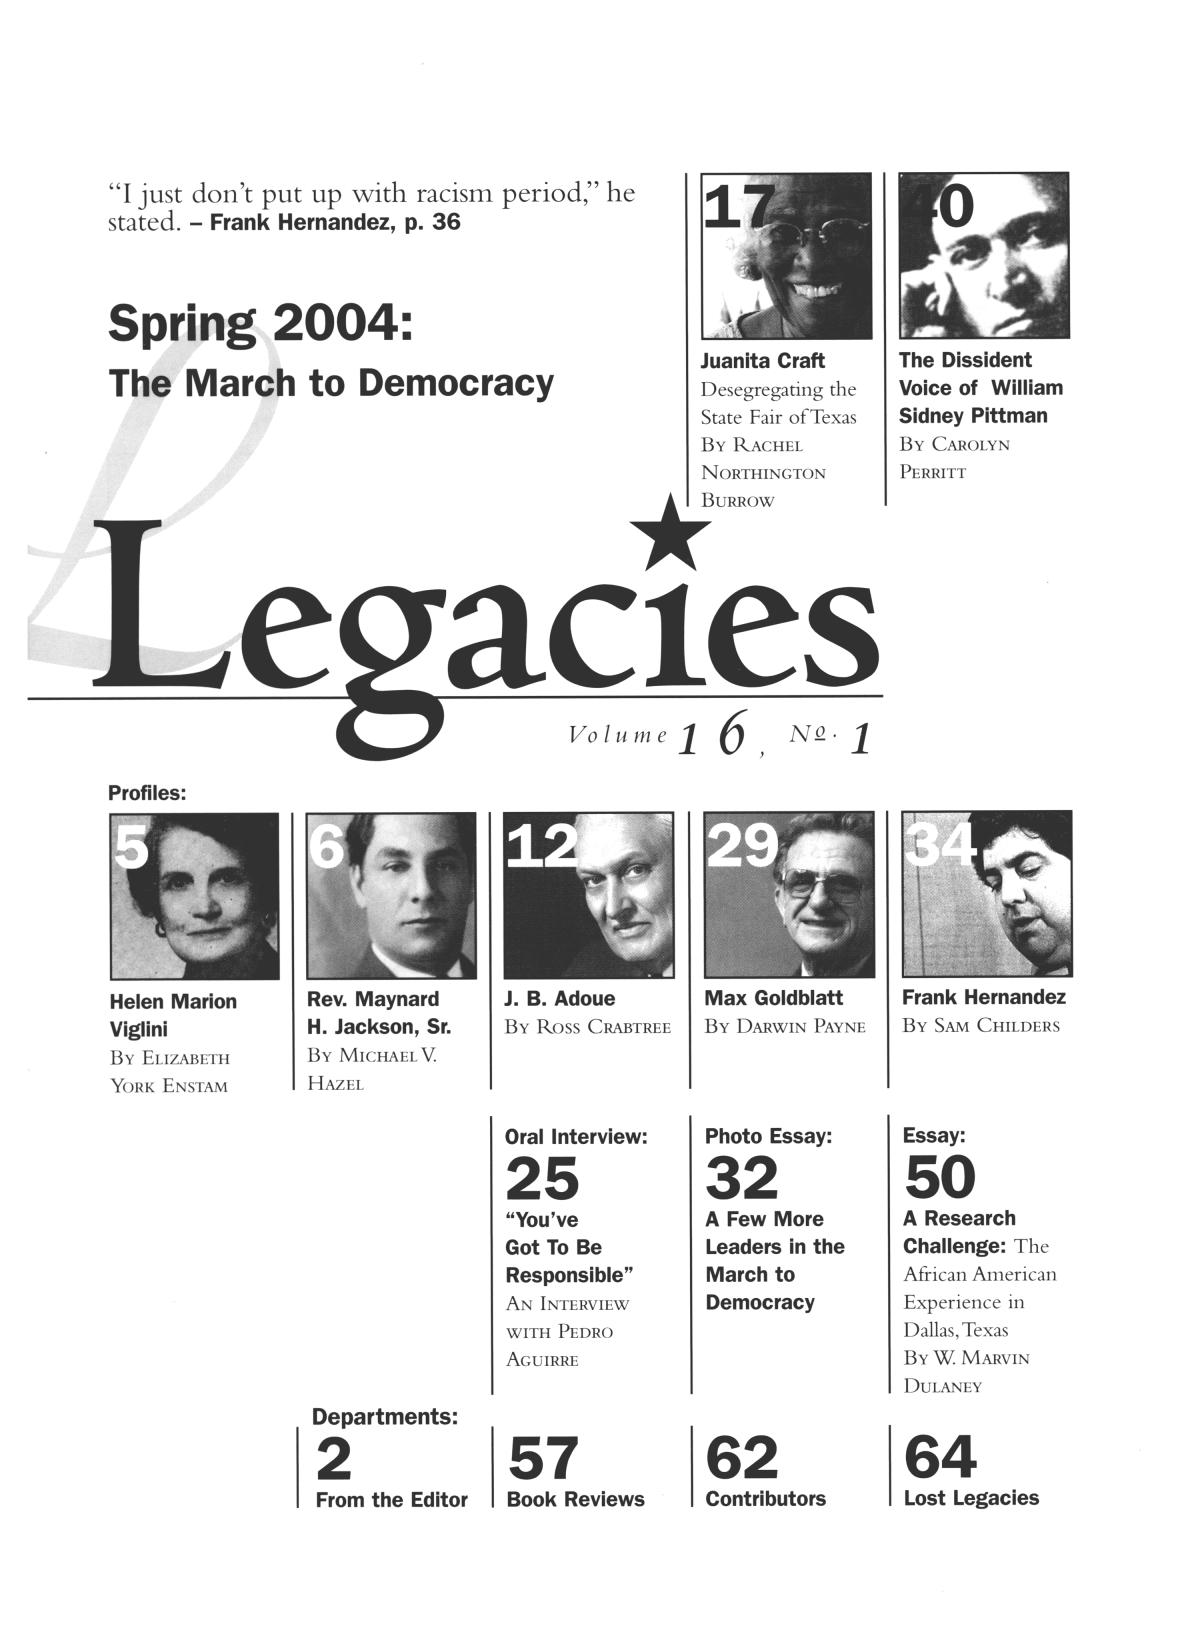 Legacies: A History Journal for Dallas and North Central Texas, Volume 16, Number 1, Spring, 2004
                                                
                                                    1
                                                